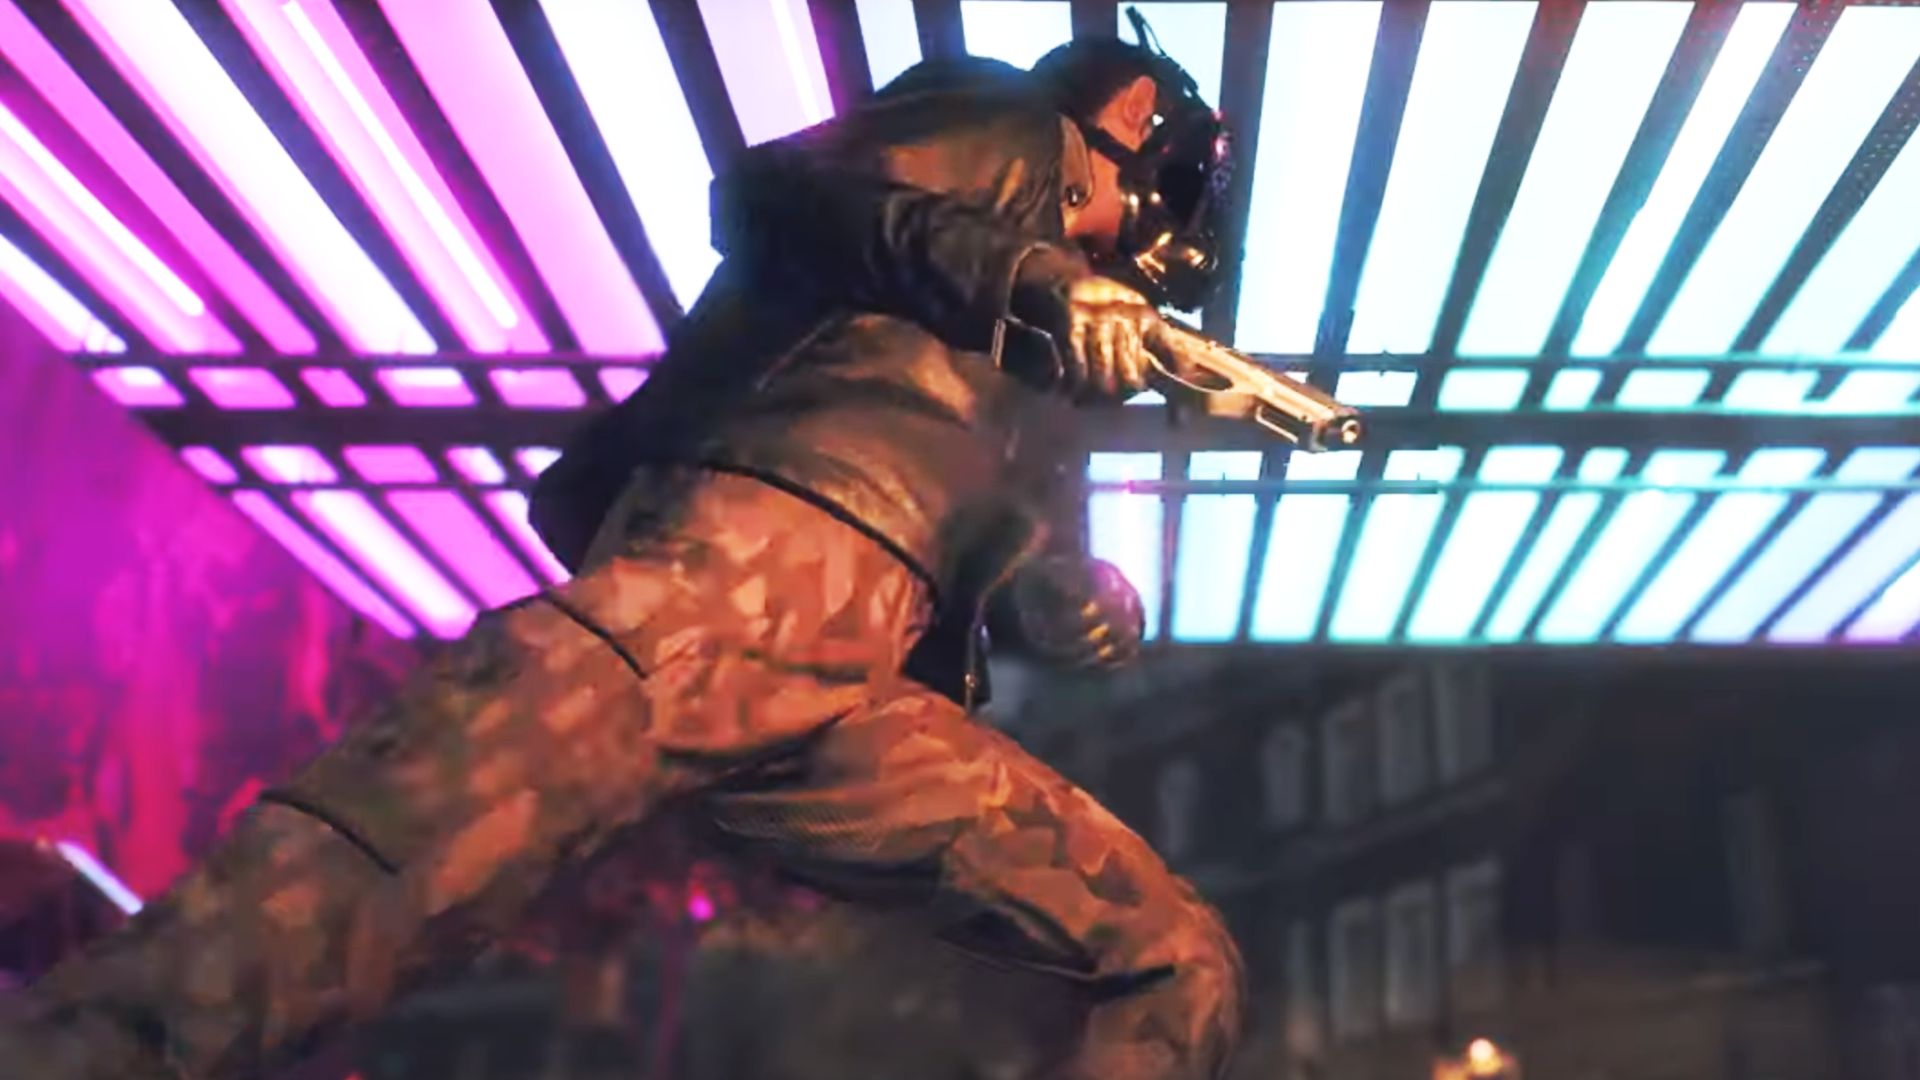 Watch Dogs: Legion 2021- Release Date, Price, and System Requirements